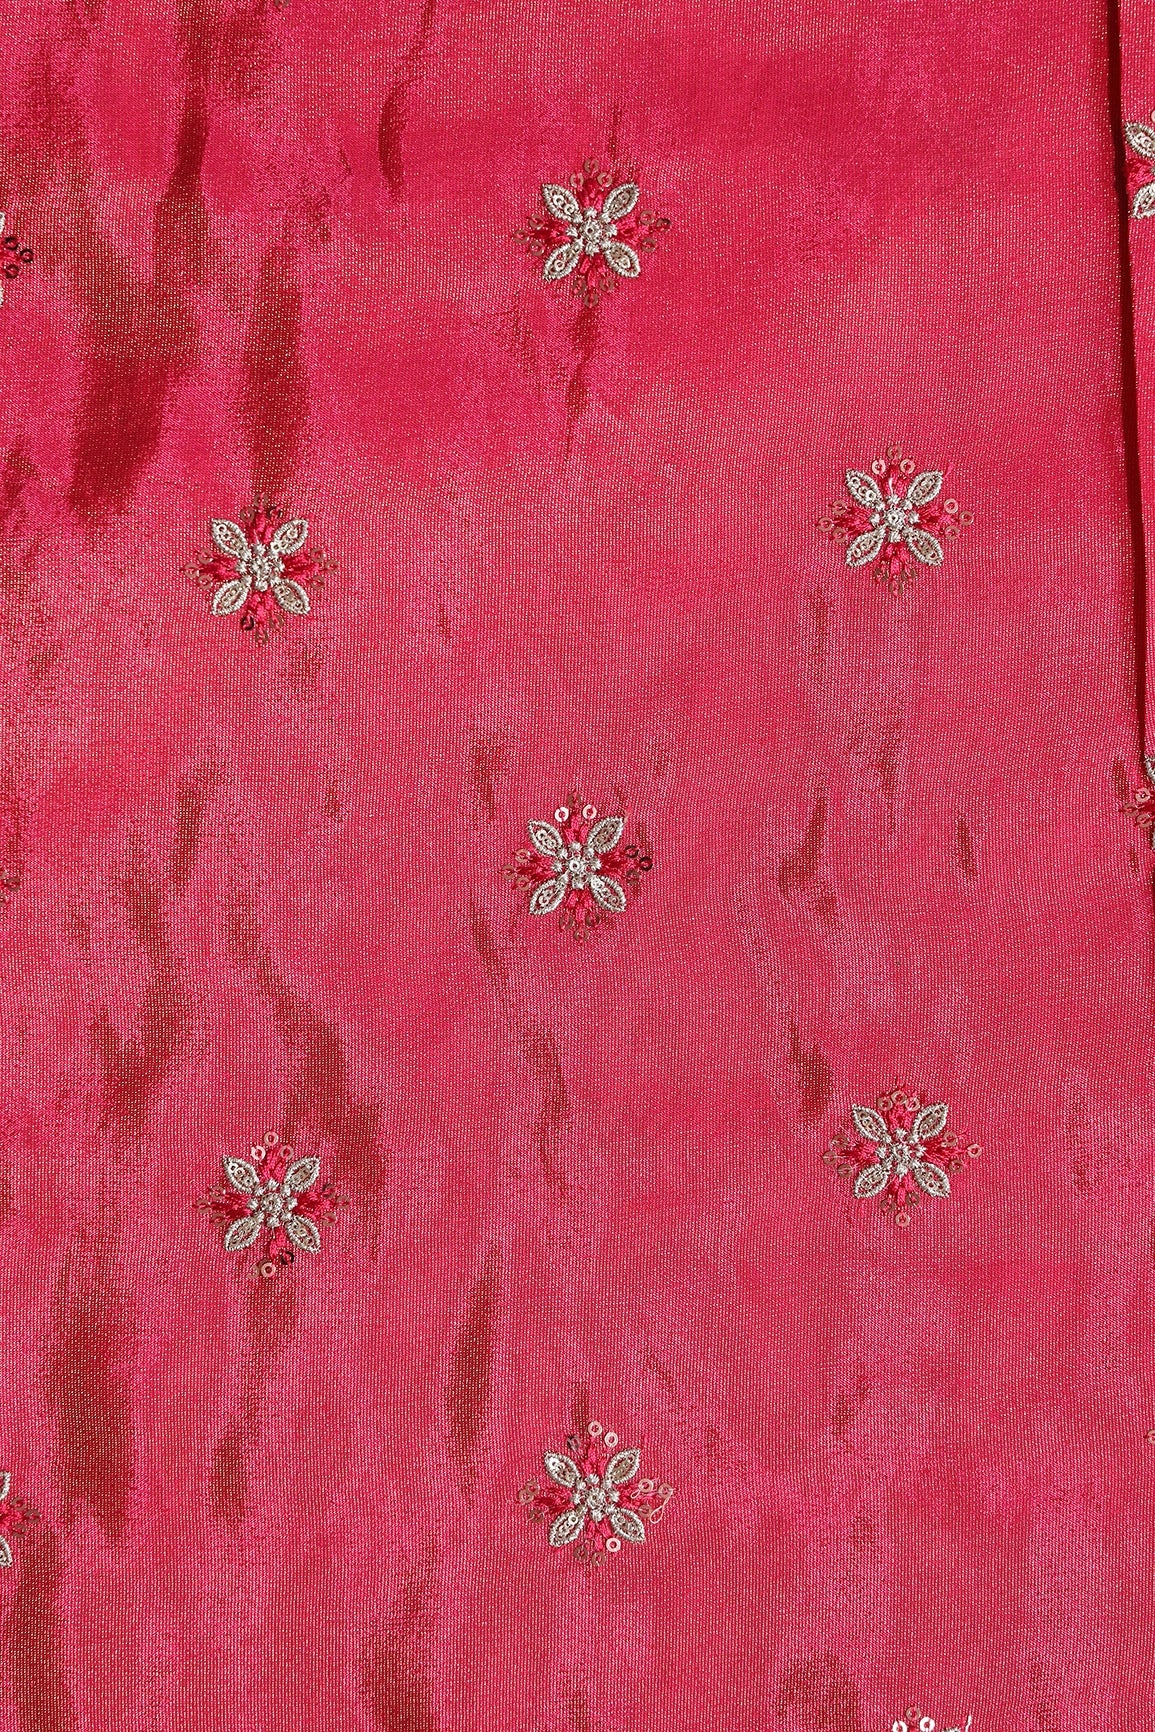 Gold Sequins And Zari Floral Booti Embroidery Work On Cerise Pink Pure Viscose Zari Tissue Fabric